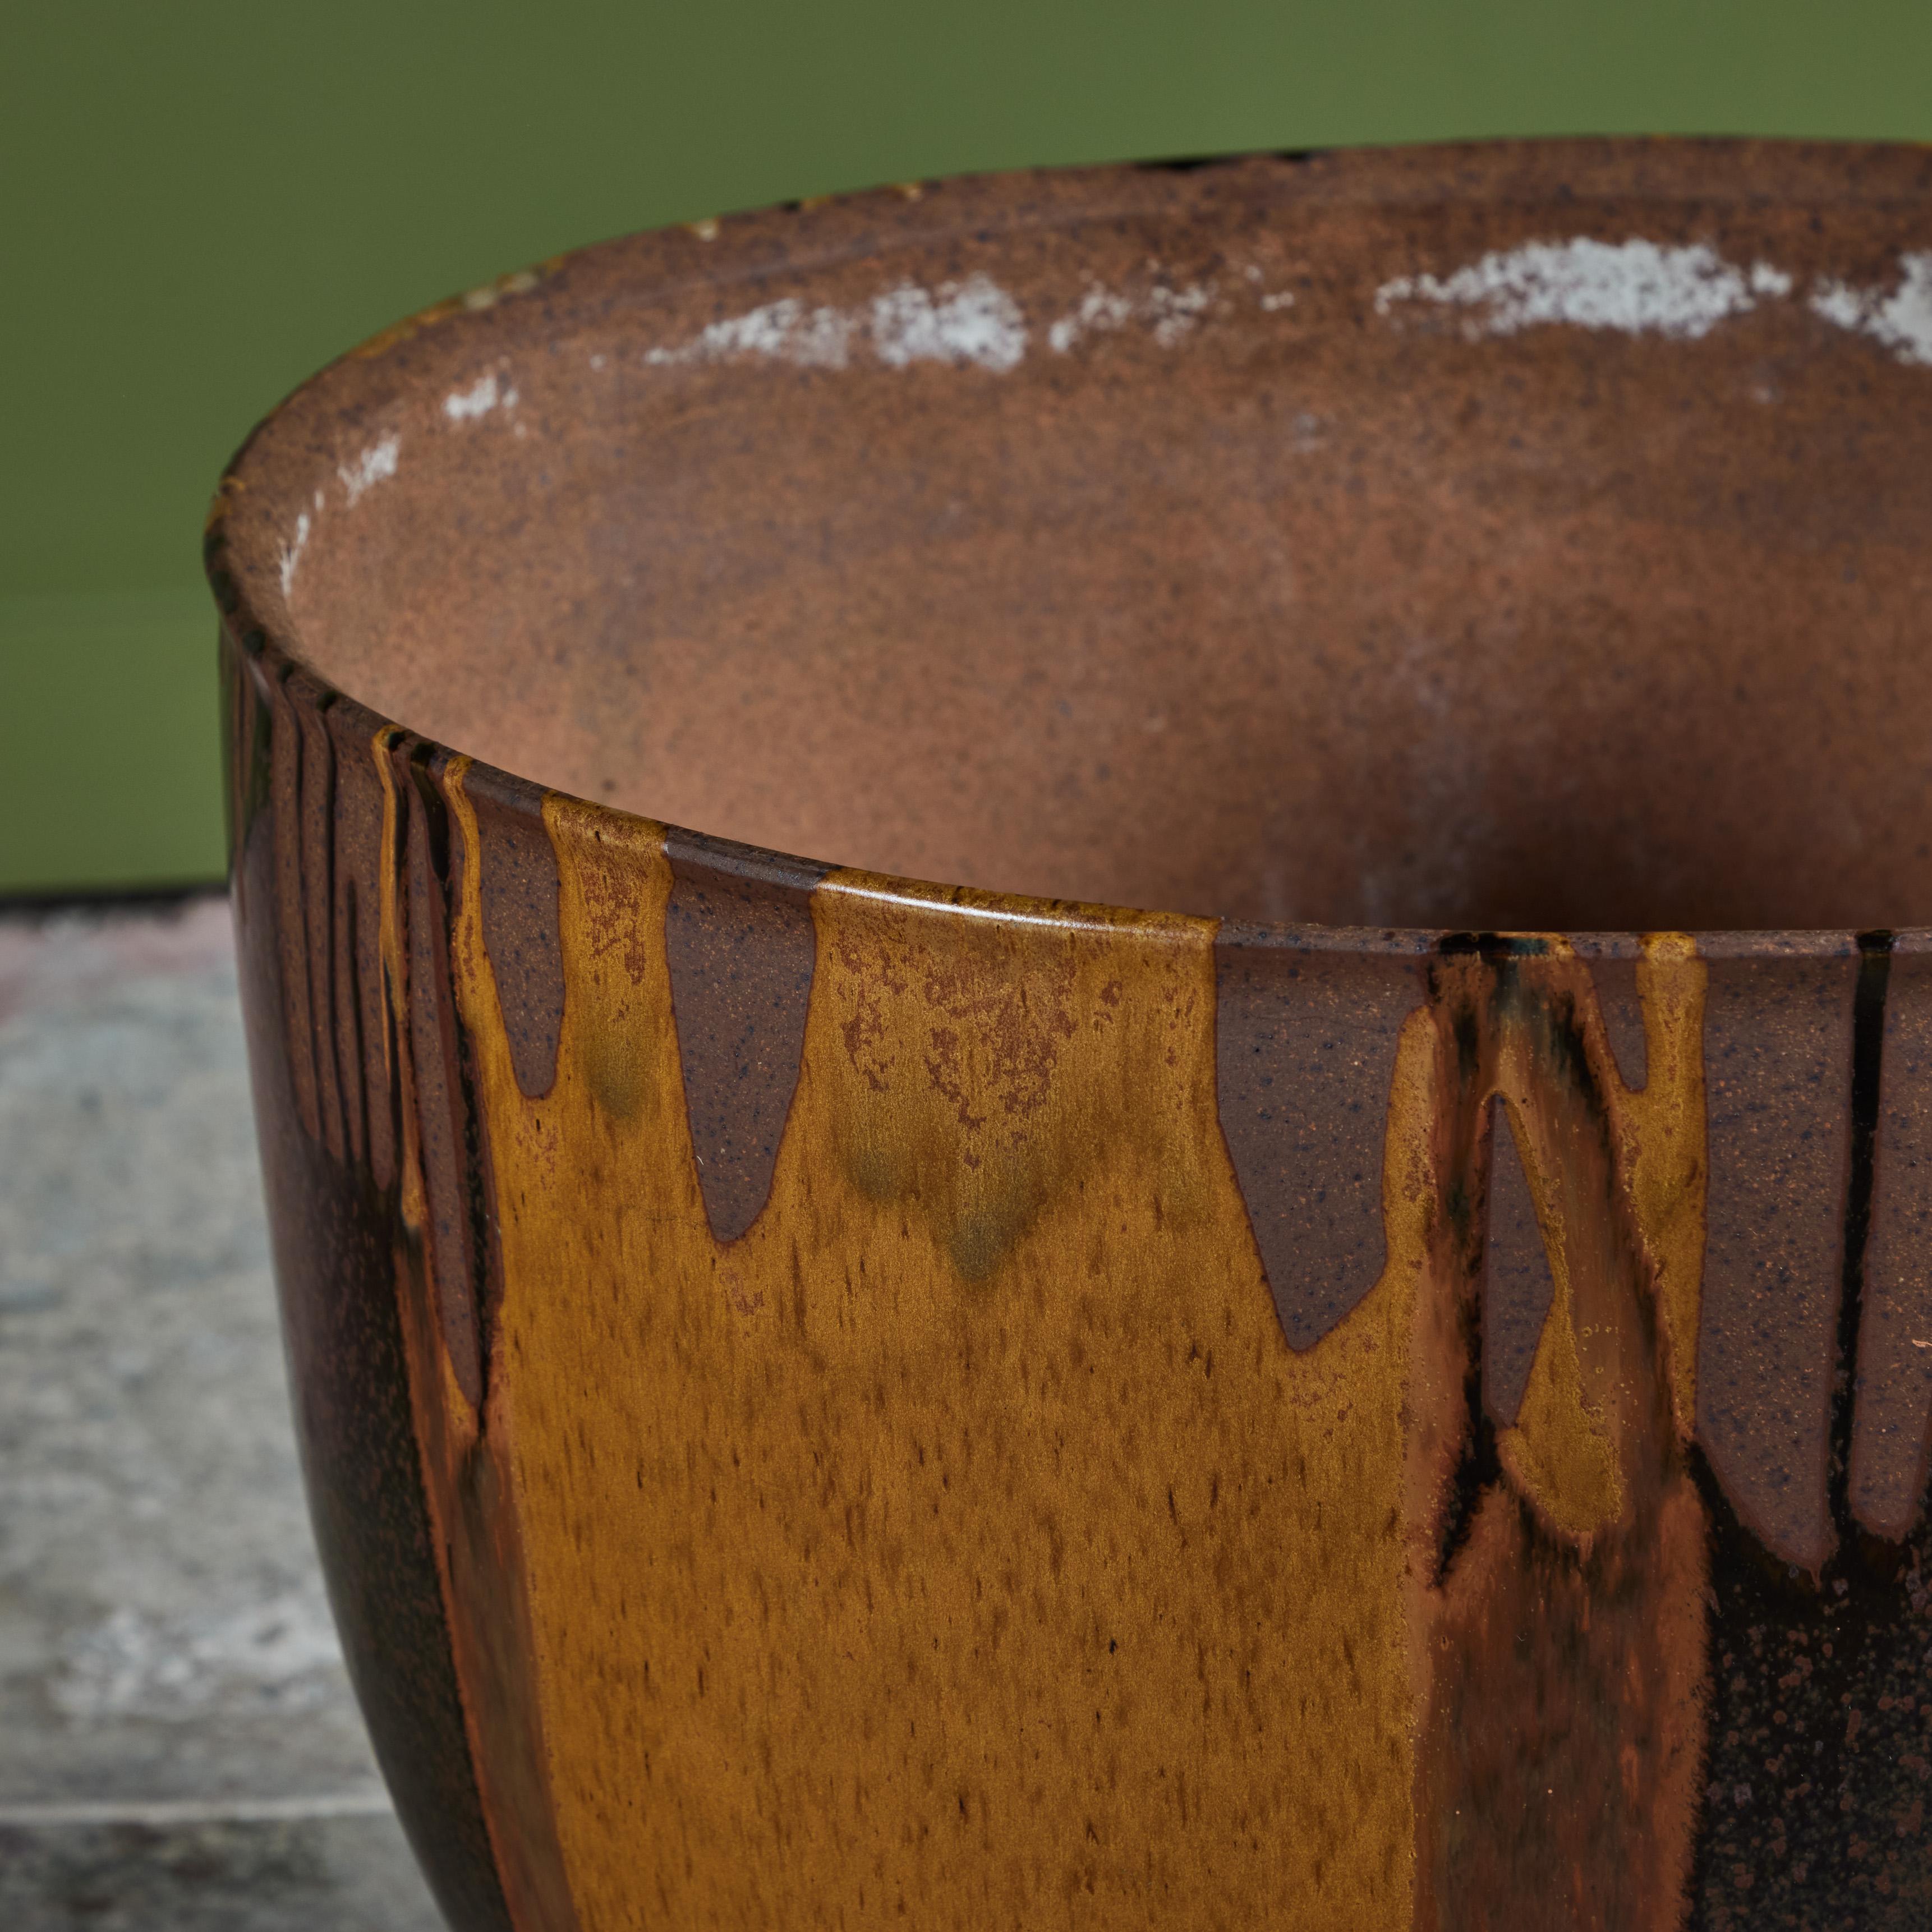 David Cressey Flame-Glaze Planter for Architectural Pottery In Excellent Condition For Sale In Los Angeles, CA